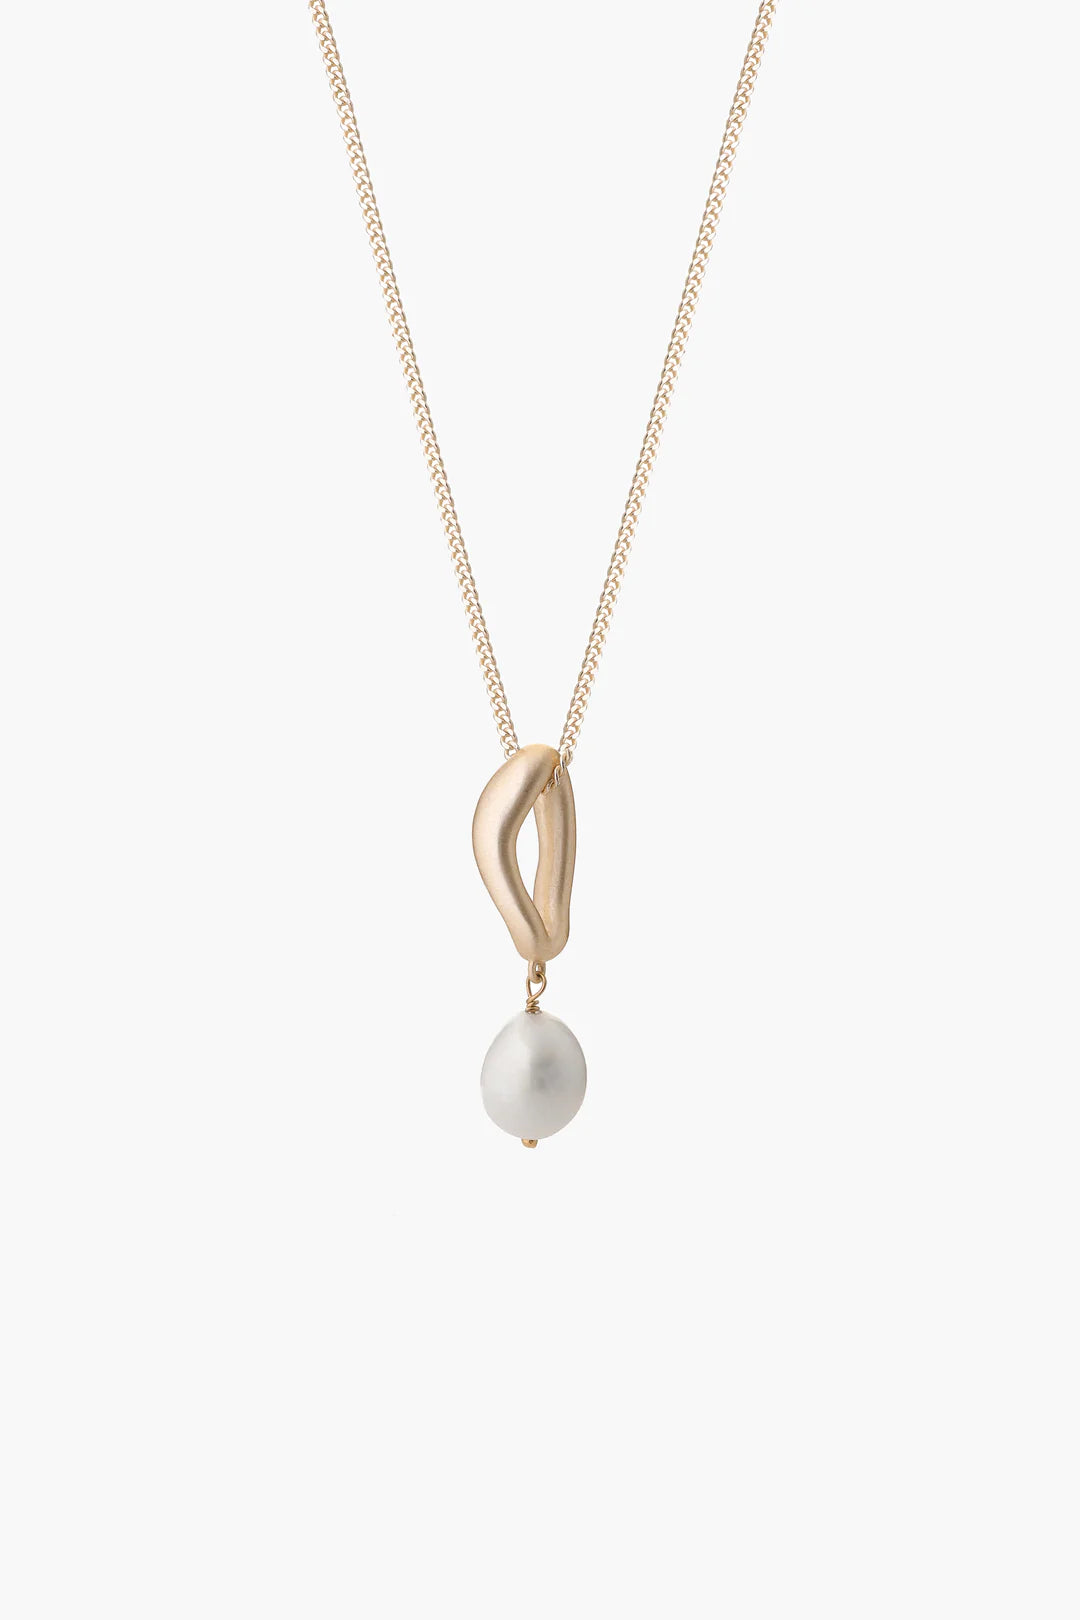 Tranquil Gold Pearl Necklace